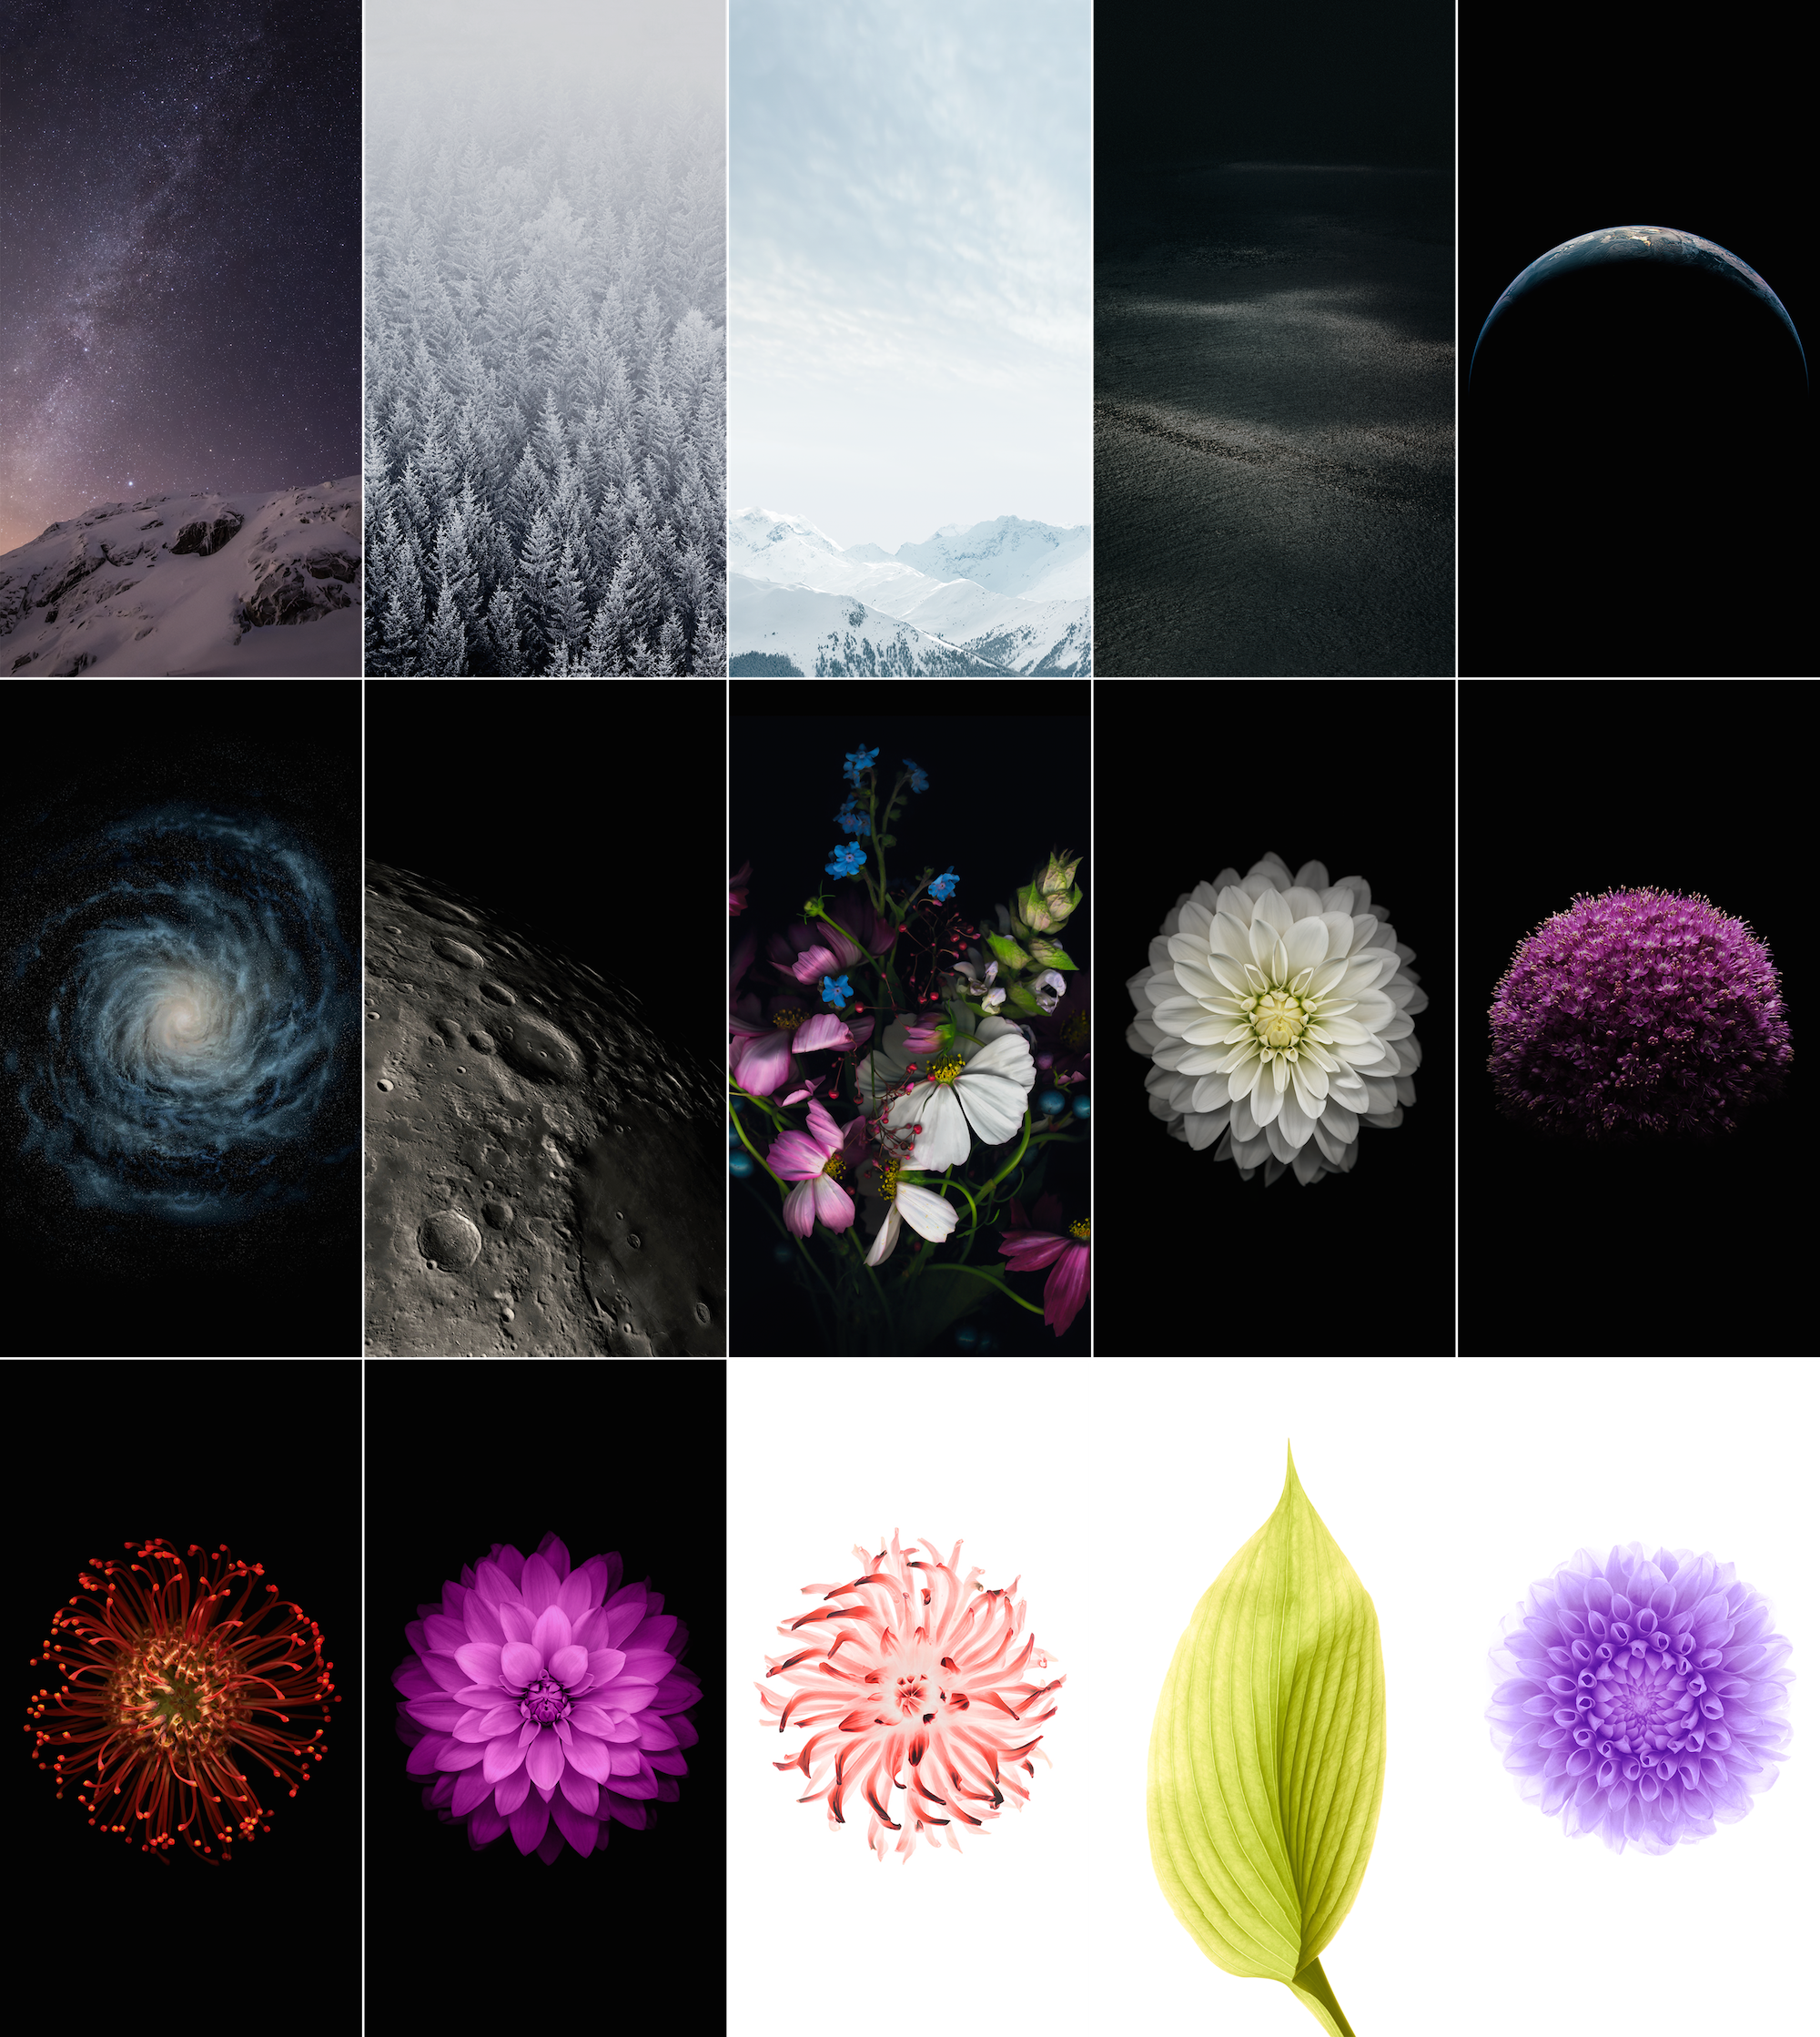 Download the new iOS 8 wallpapers